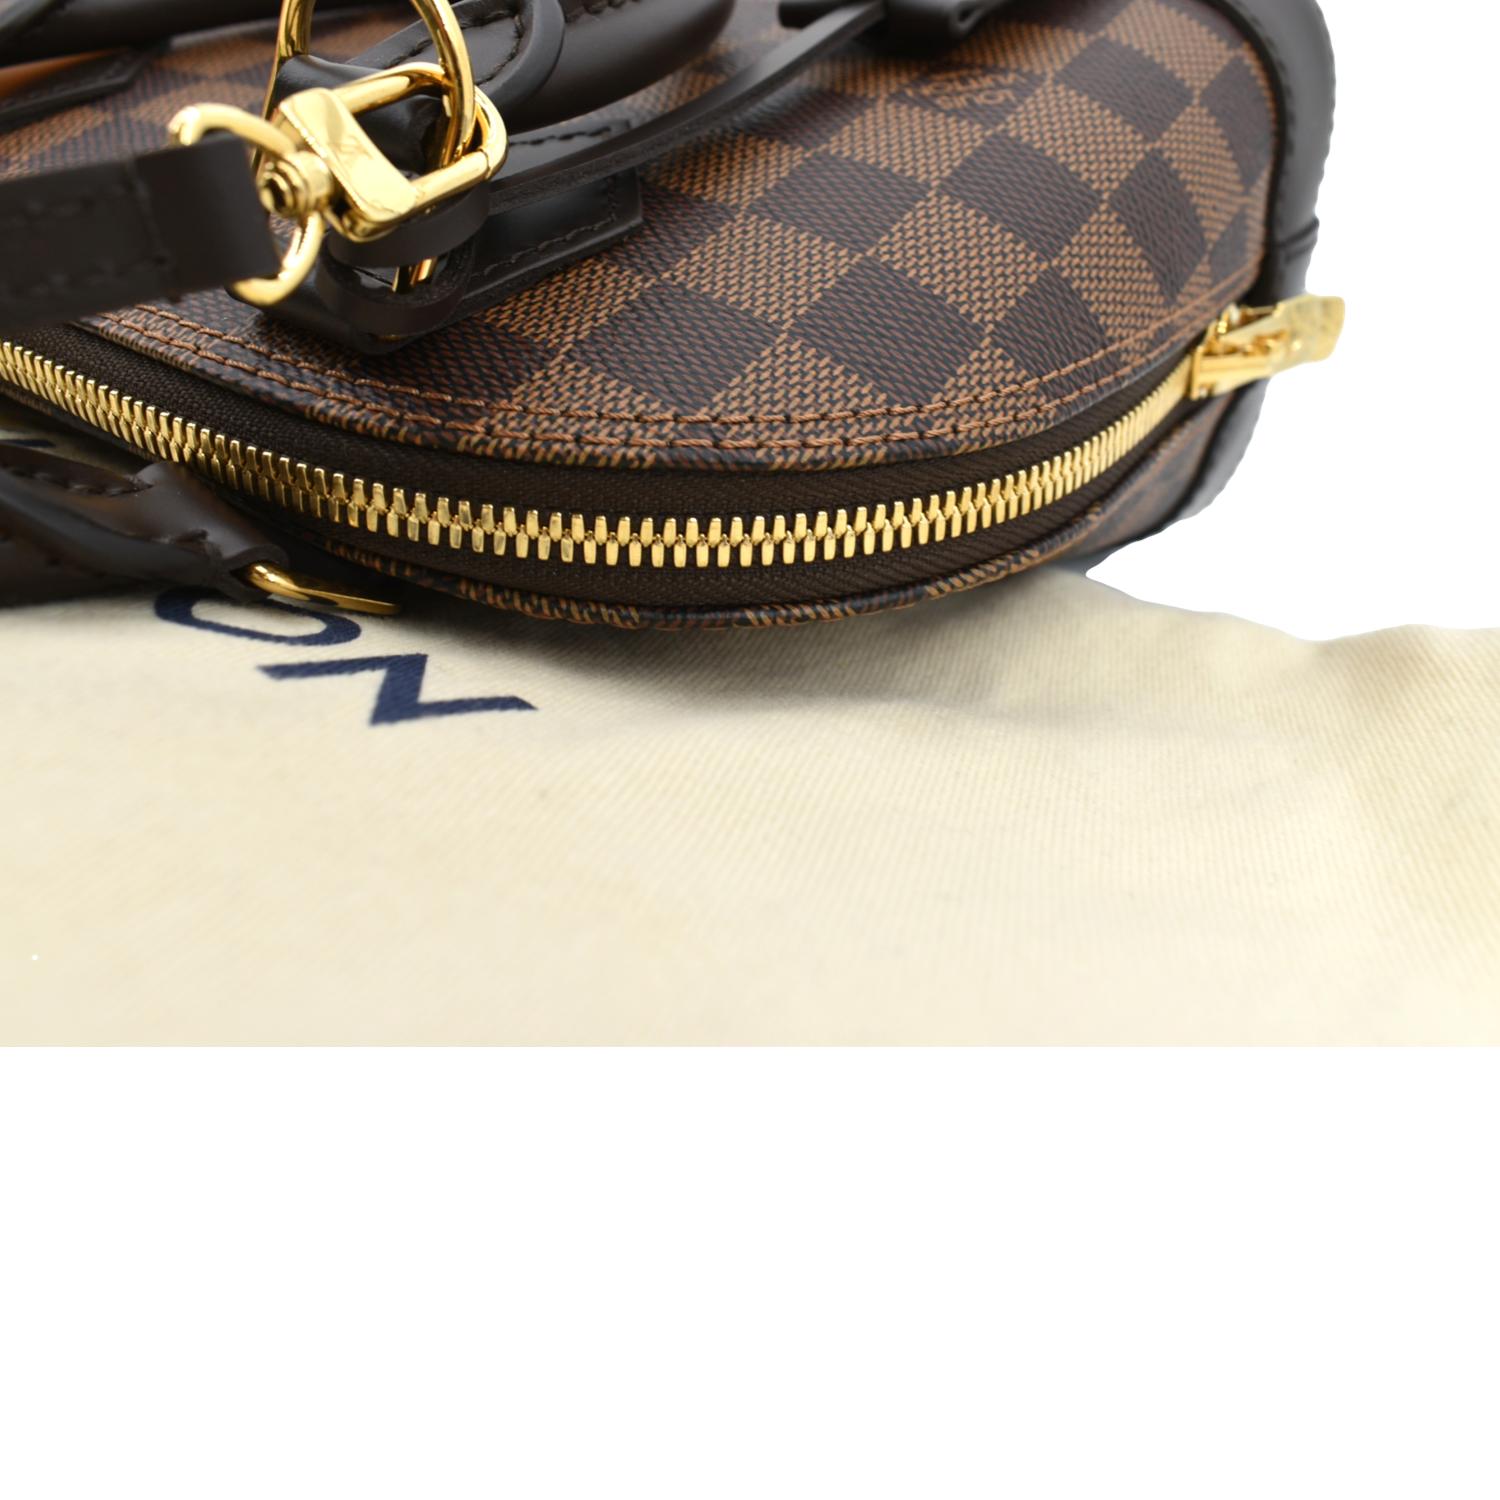 Alma bb leather crossbody bag Louis Vuitton Brown in Leather - 35283463